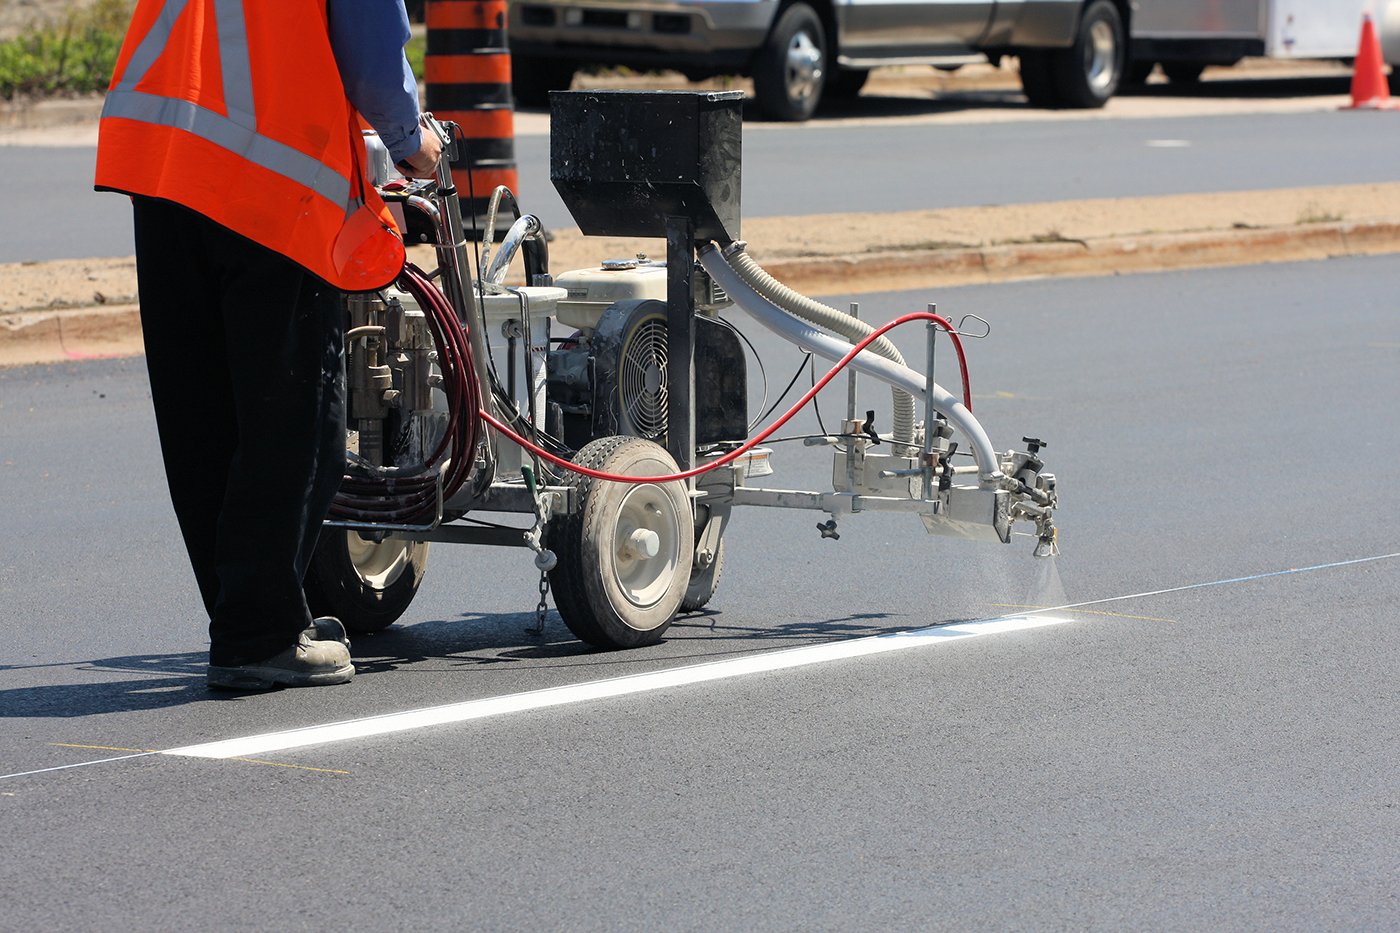 A person uses a machine to paint white lines on asphalt surface of road